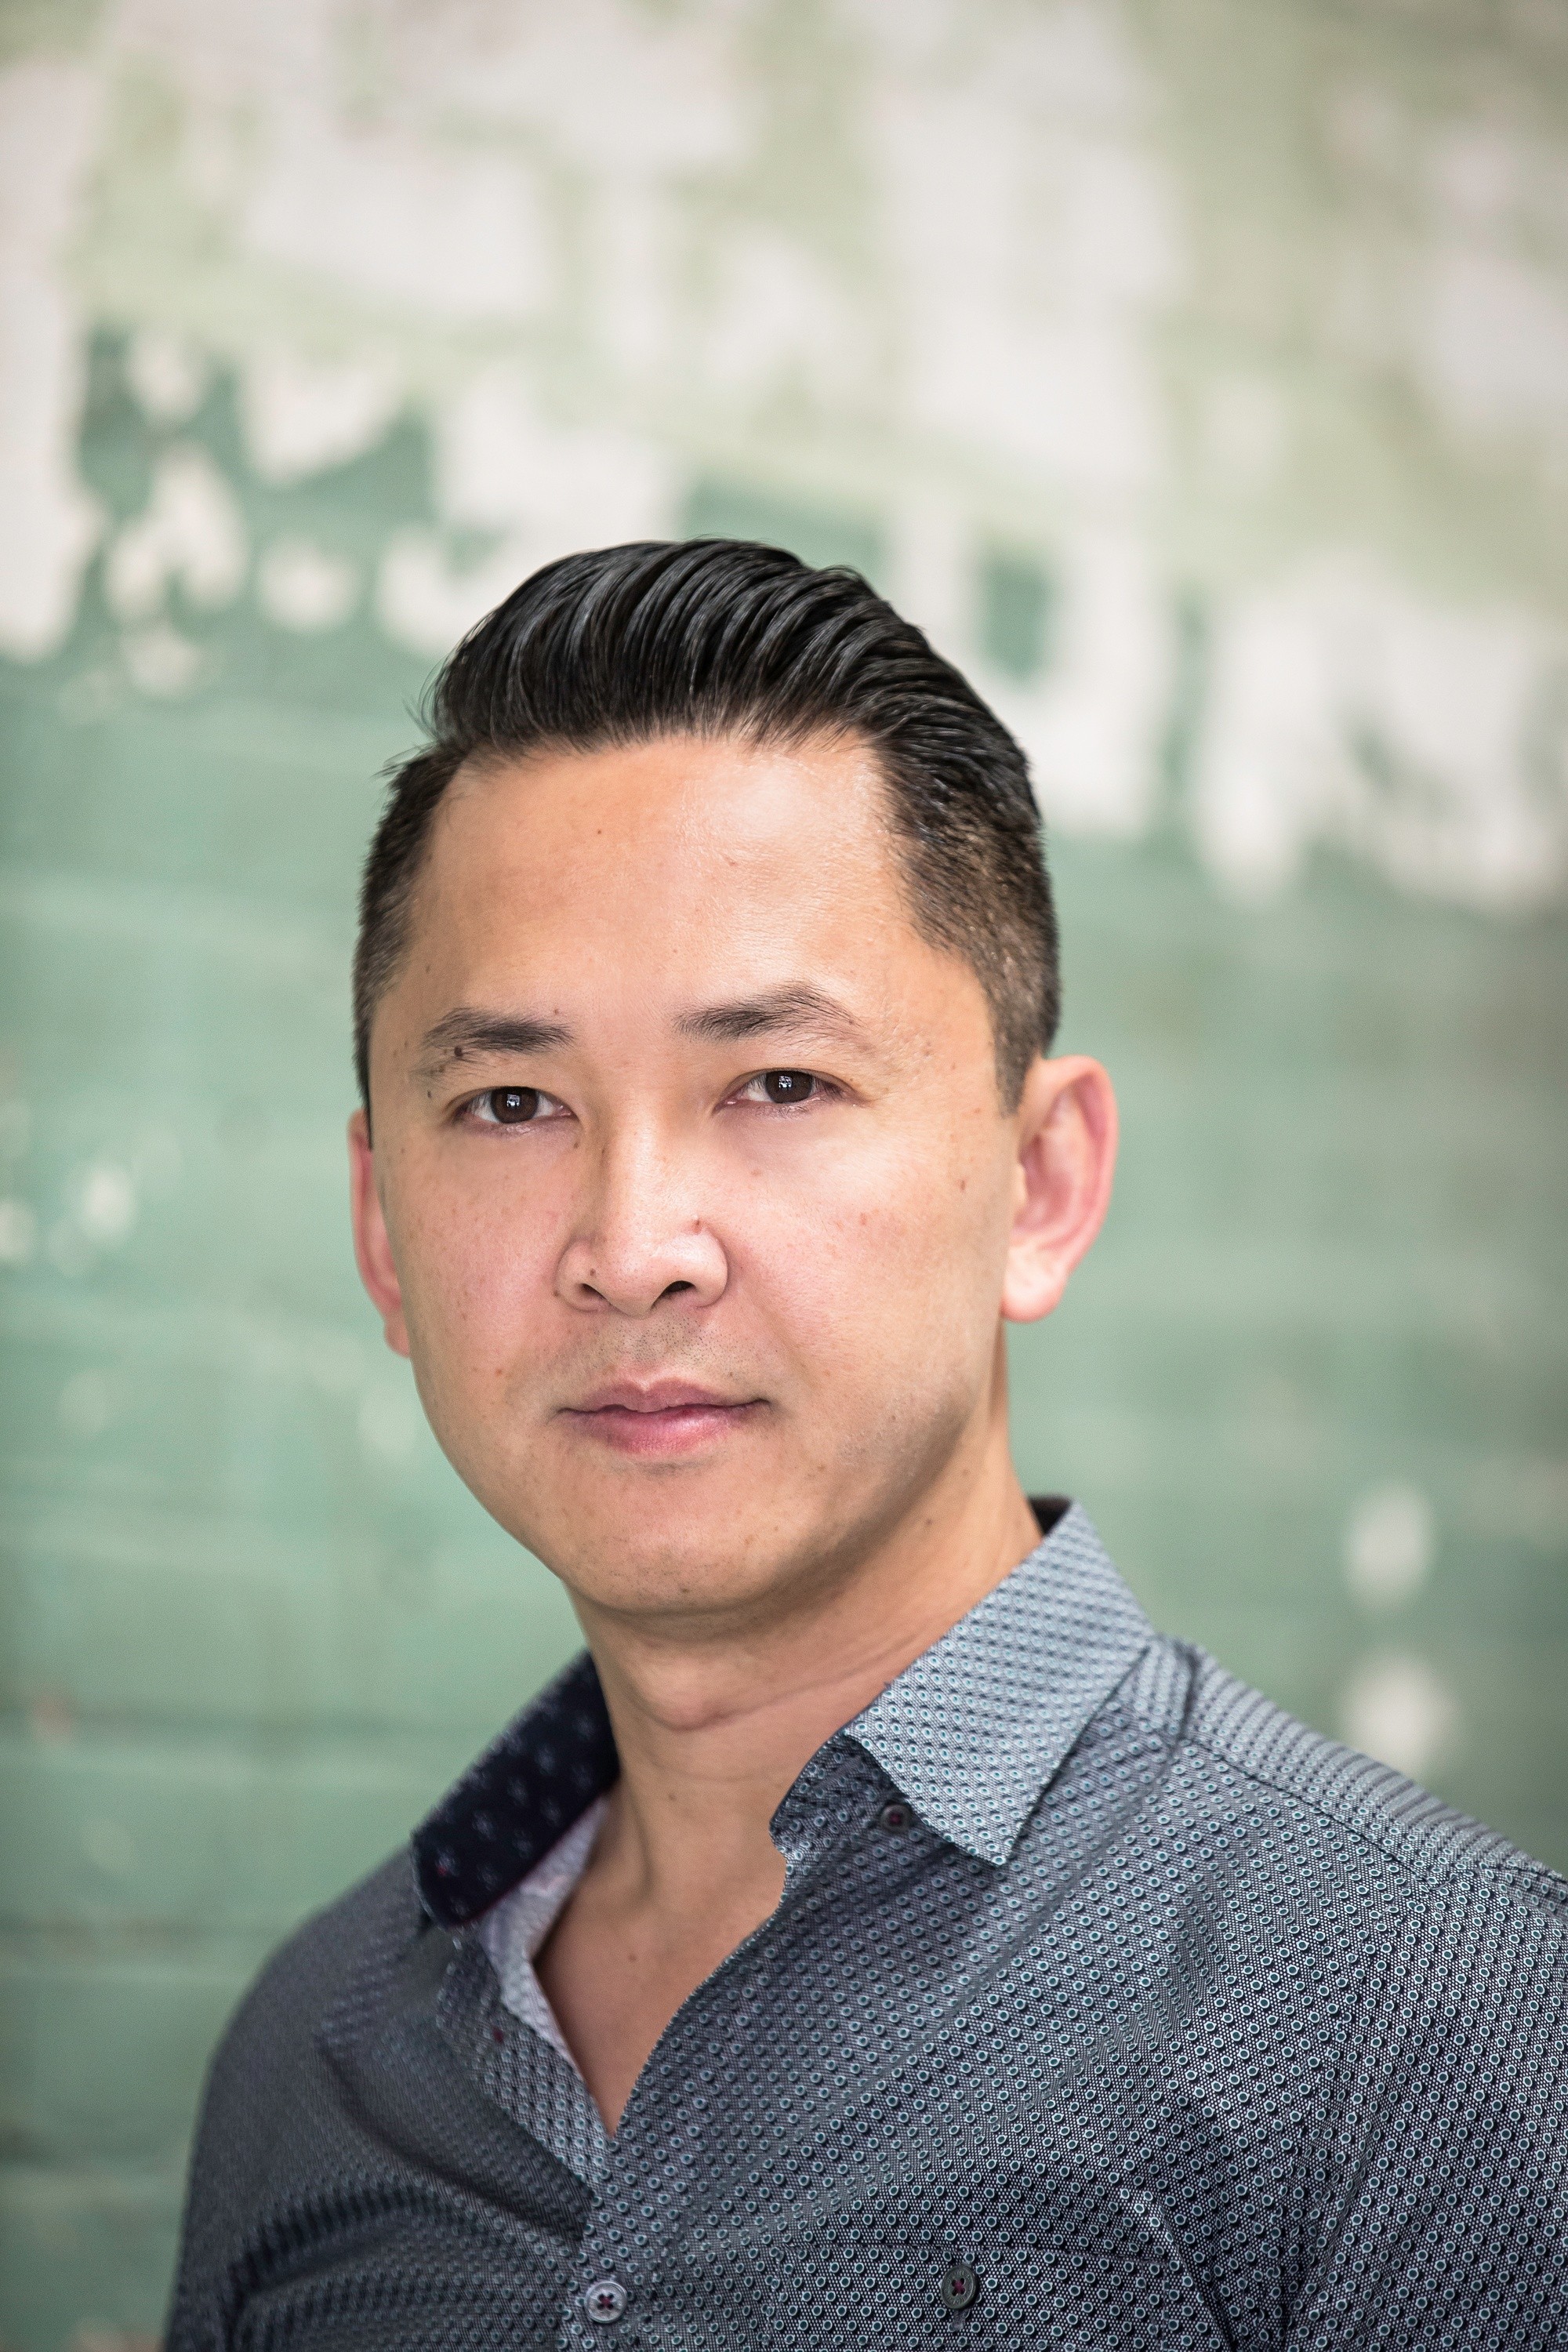 Viet Thanh Nguyen stands in front of a green brick wall, wearing a button-up shirt, looking at the camera.